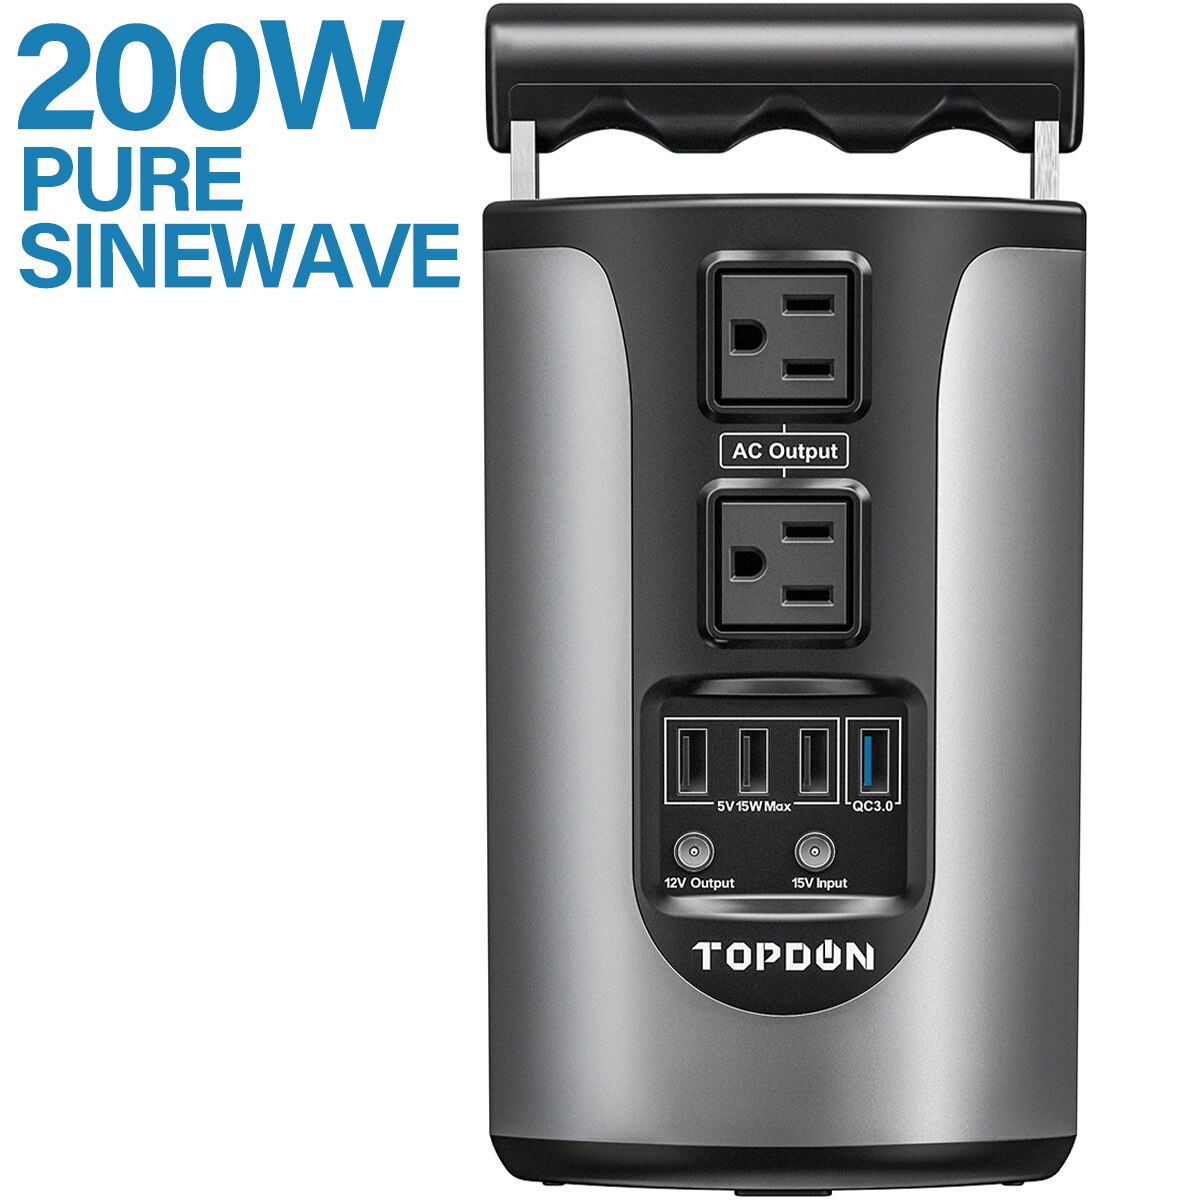 Topdon-H200-Portable-Energy-Storage-Power-Supply-185WH-Capacity-200W-Pure-Sinesave-Energy-Storage-Power-Supply-With-4-USB-Ports-1005002130052063